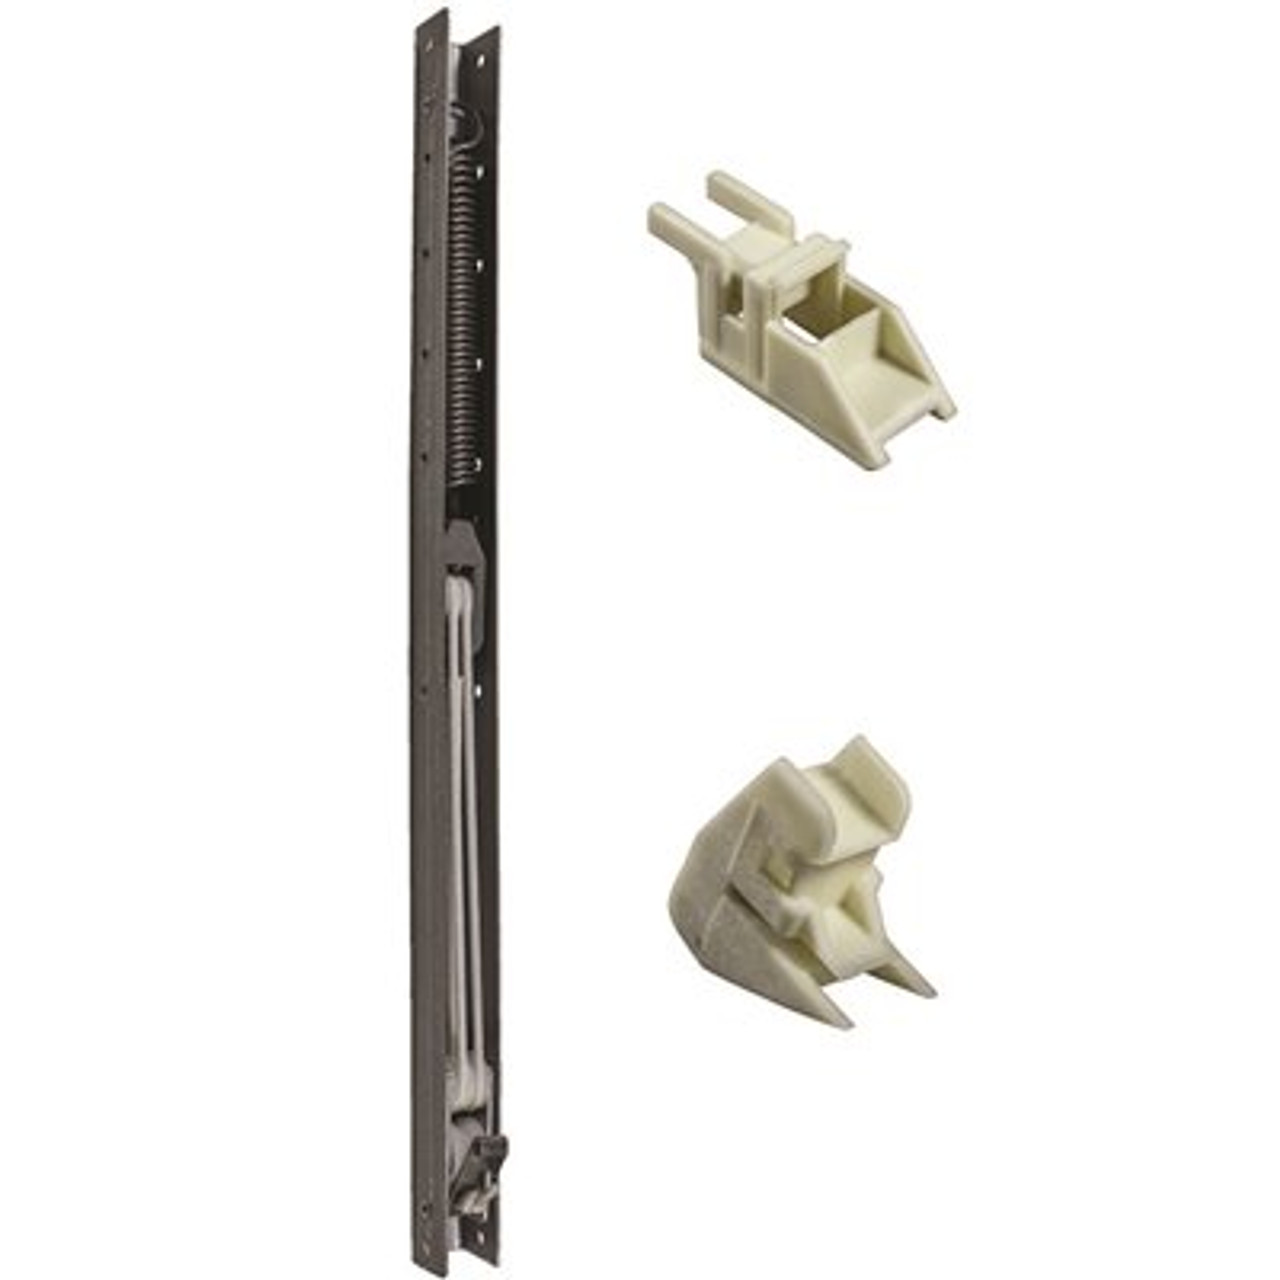 20 In. L Window Channel Balance 1920 With 9/16 In. W X 5/8 In. D Top And Bottom End Brackets Attached - 314413253